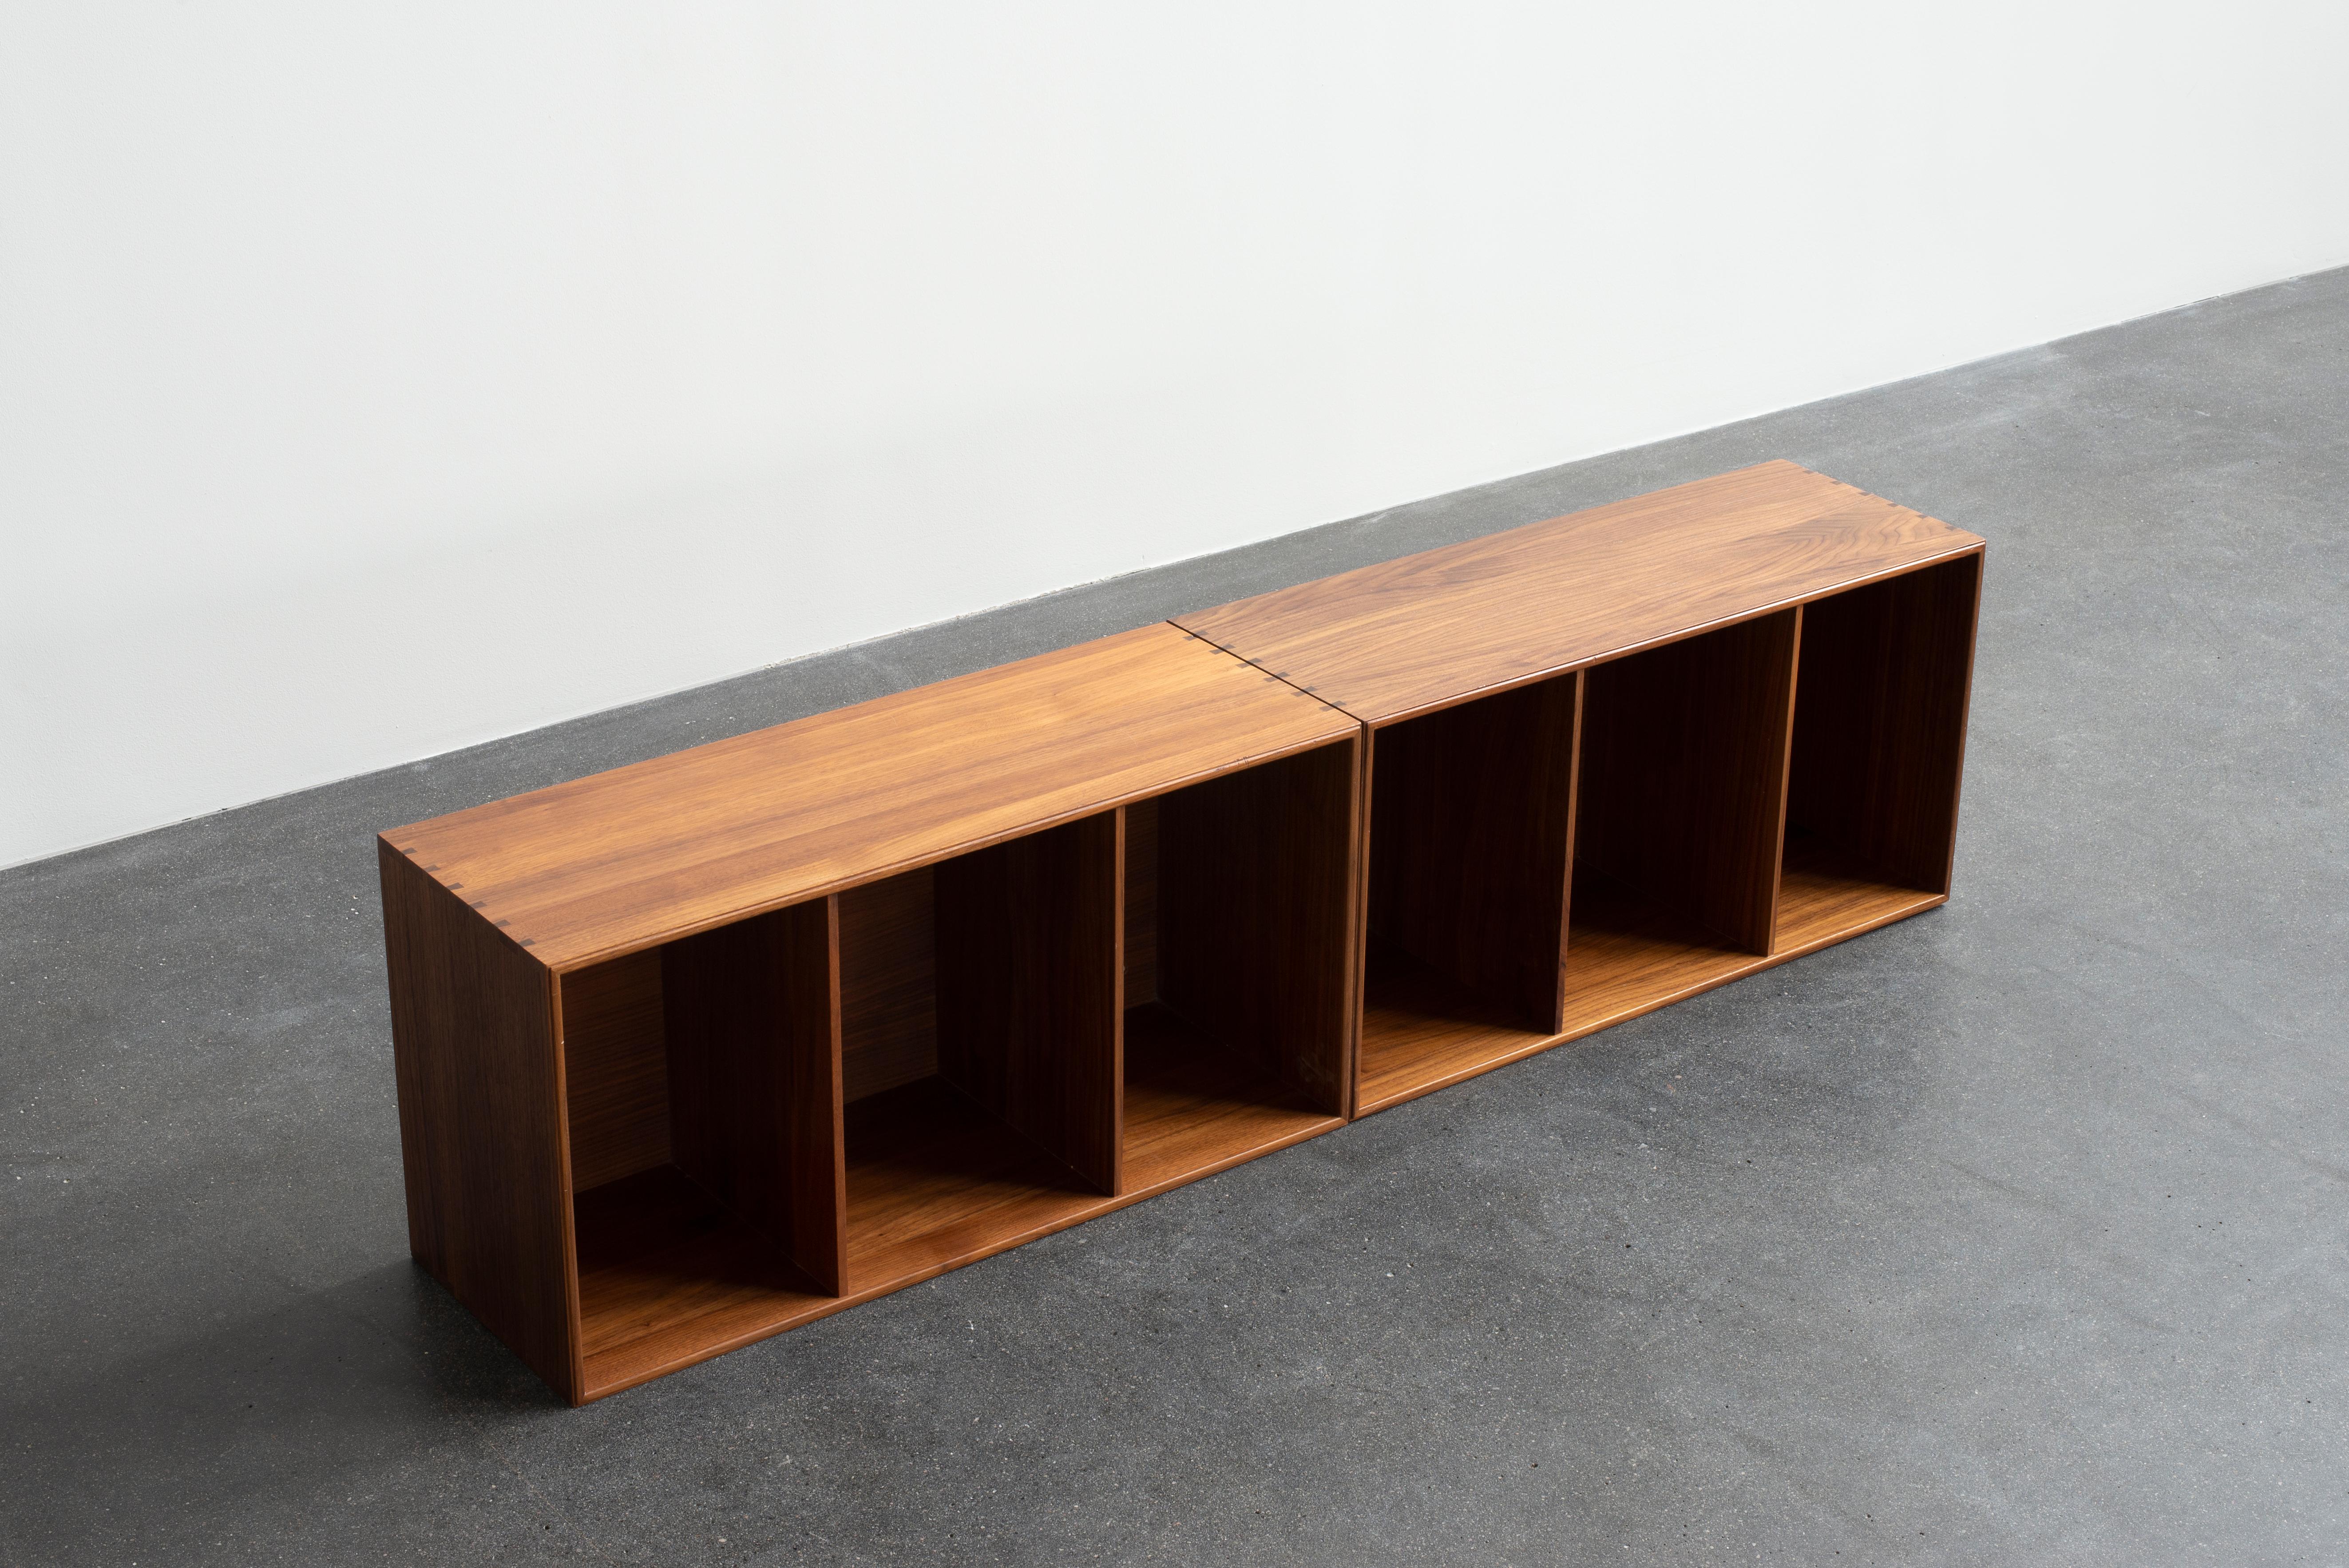 Lacquered Mogens Koch Pair of Bookcases for Rud, Rasmussen